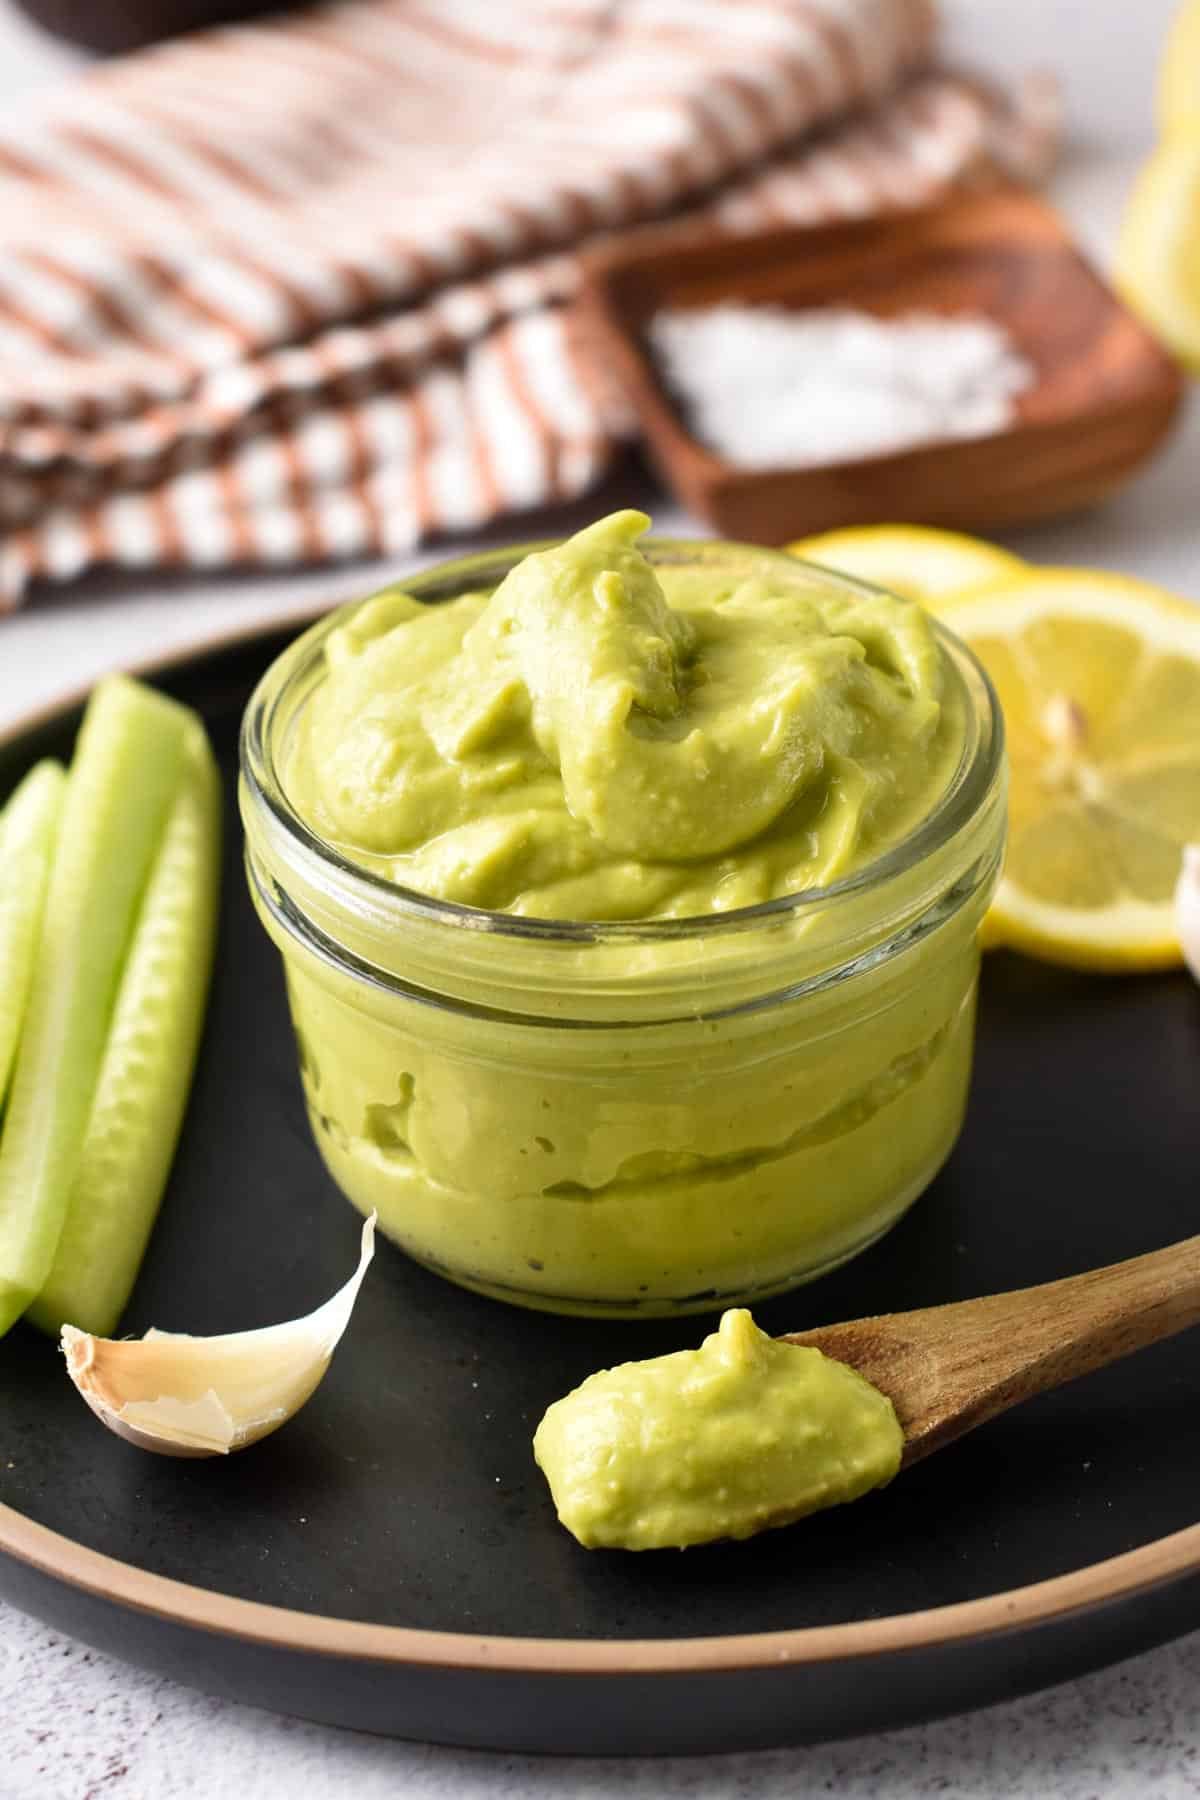 A jar full of avocado mayonnaise on a black plate, in front of lemon slices and cucumber sticks.